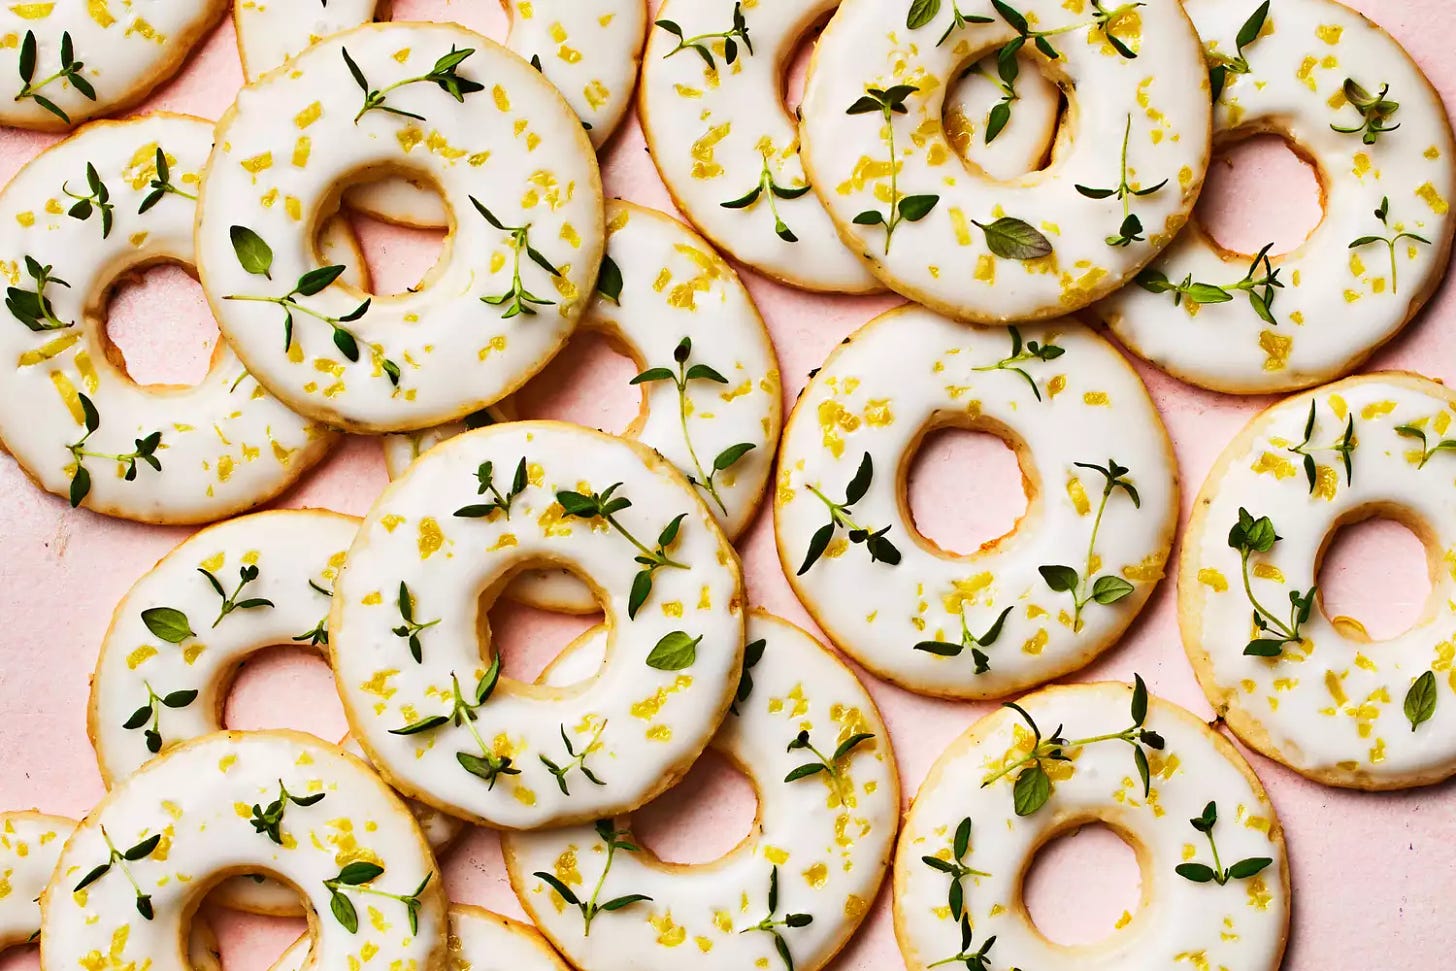 Southern Living Lemon-Thyme Shortbread Cookies ready to serve